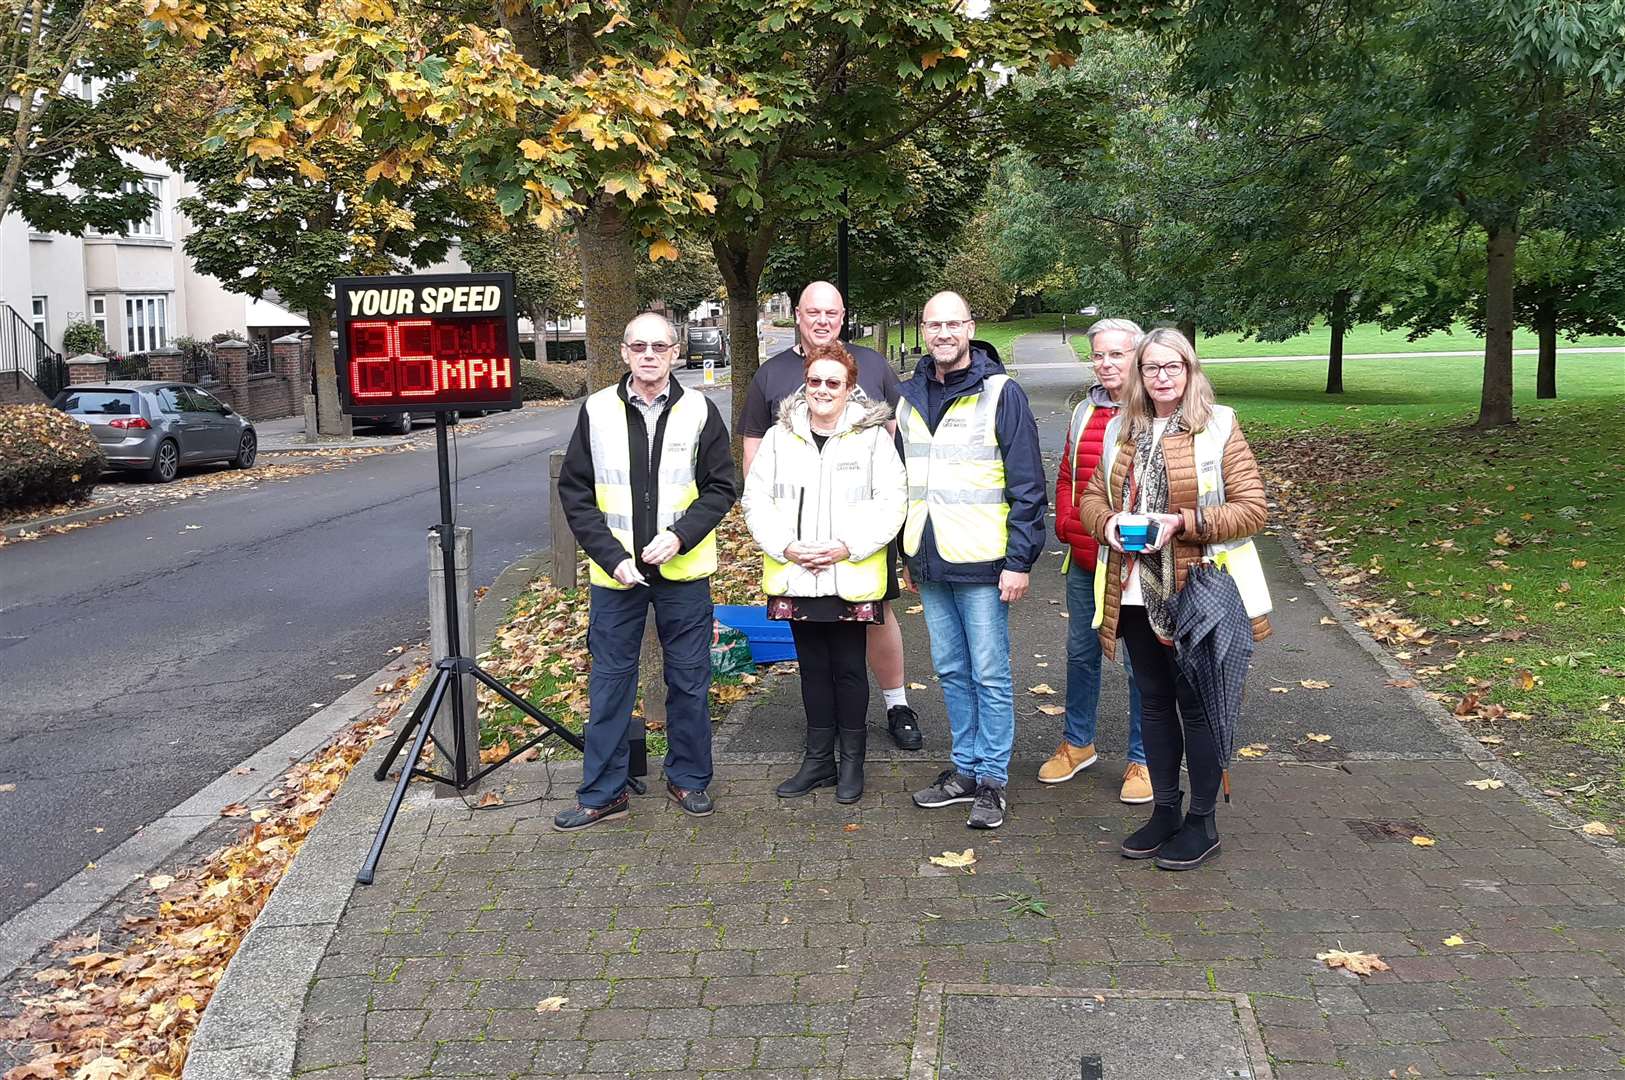 Ingress Park residents take part in community speed watch activity in Greenhithe